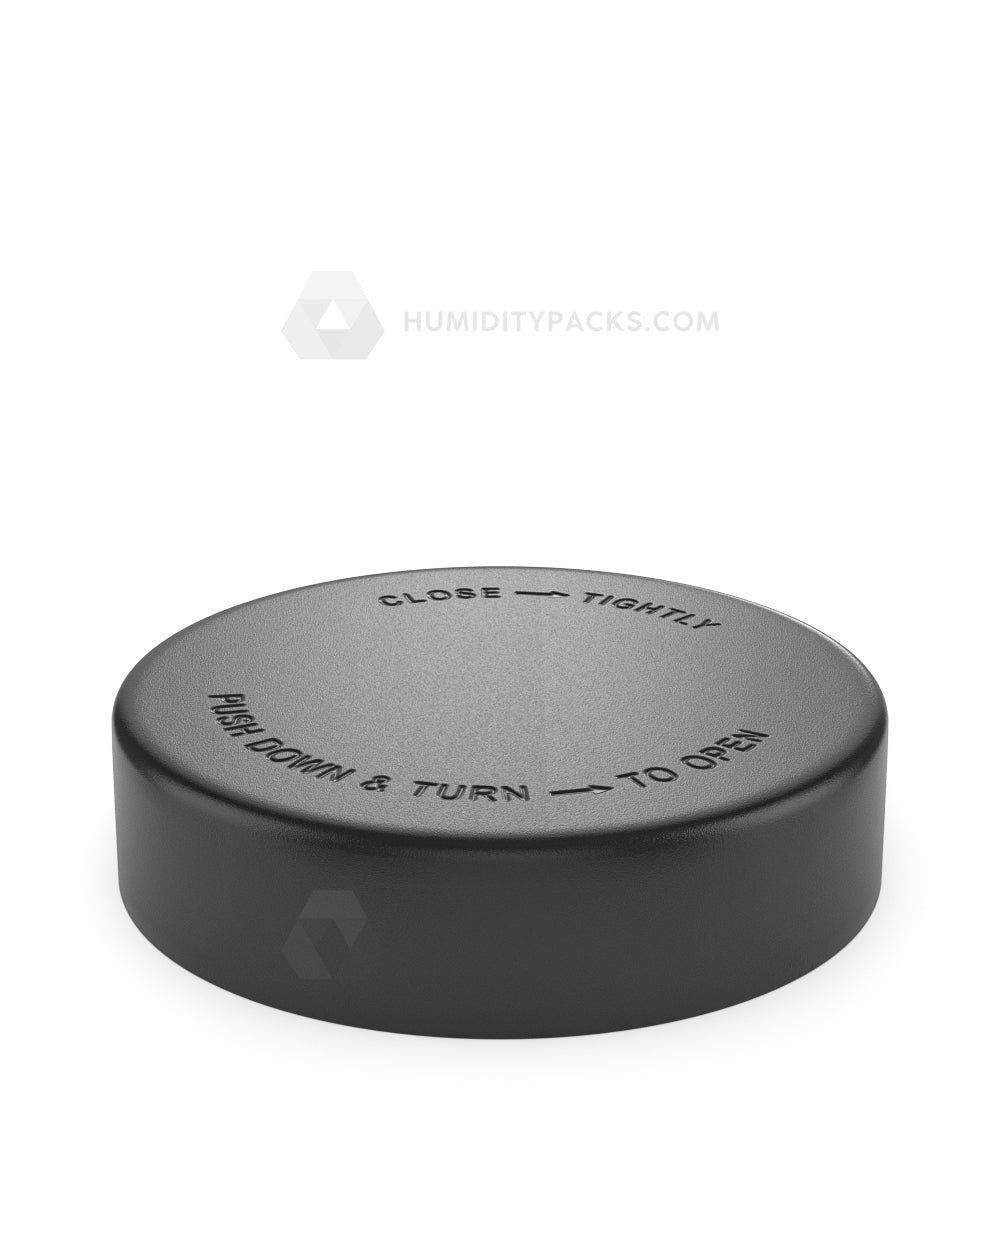 78mm Push and Turn Child Resistant Plastic Caps With Foam Liner - Semi Gloss Black - 48/Box